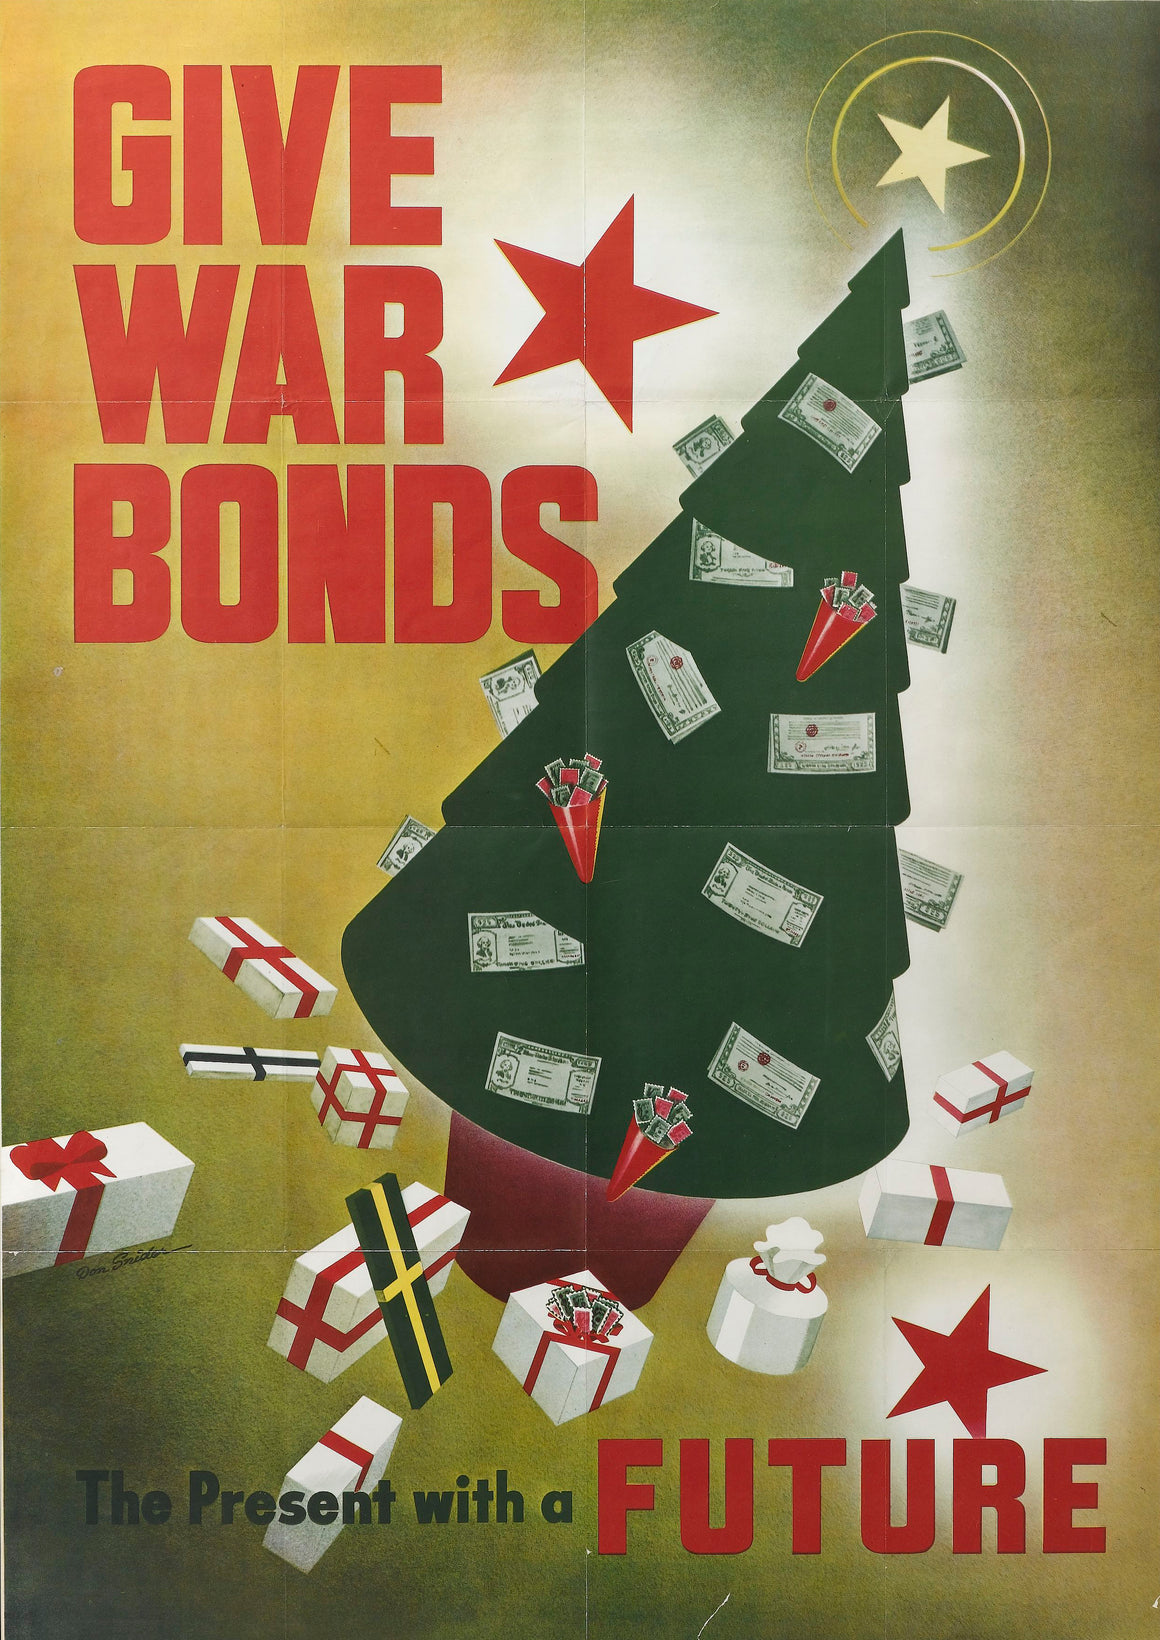 "Give War Bonds. The Present with a Future." Vintage WWII U.S. Treasury Poster, 1943